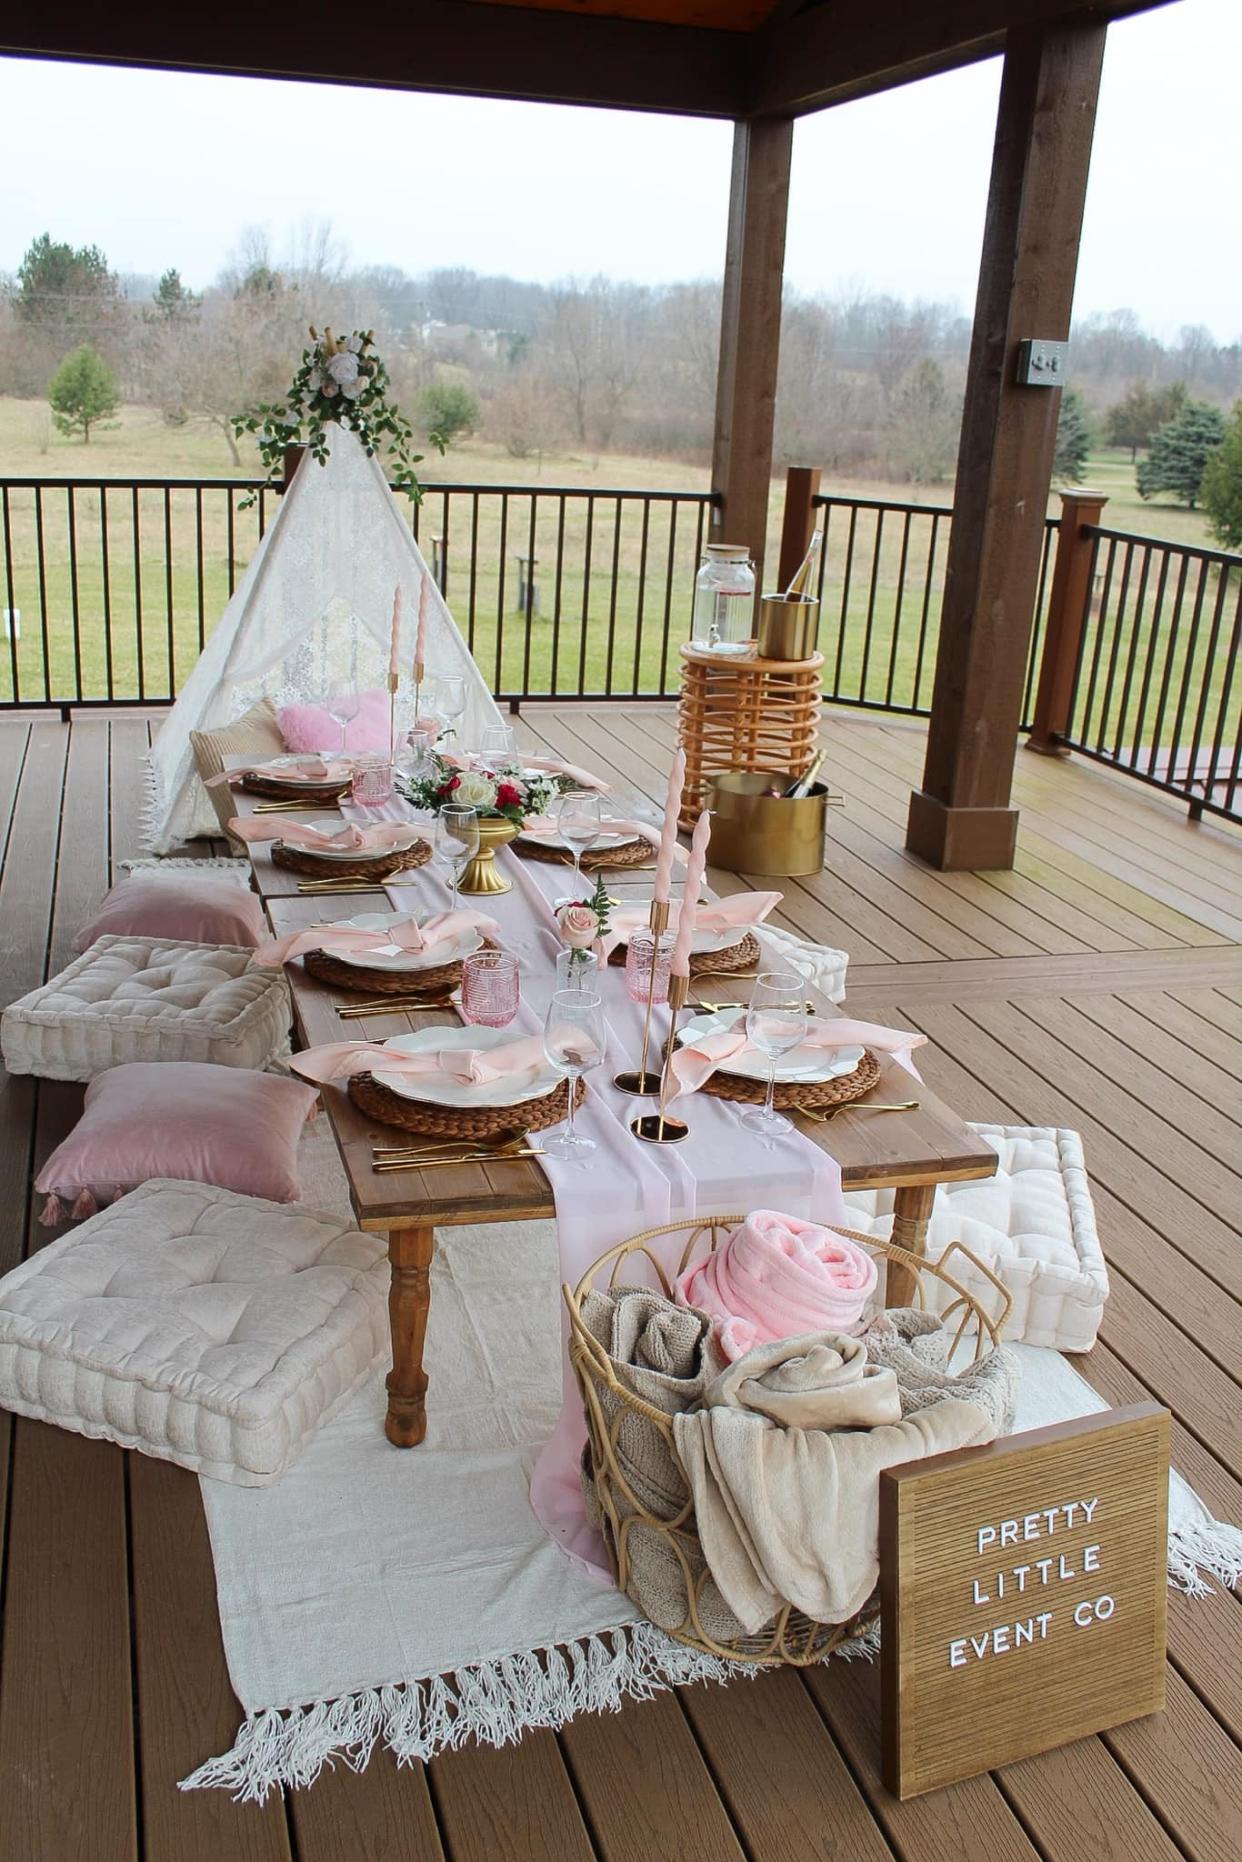 Pretty Little Event Co. of Fowlerville specializes in sleepovers and luxury picnics.